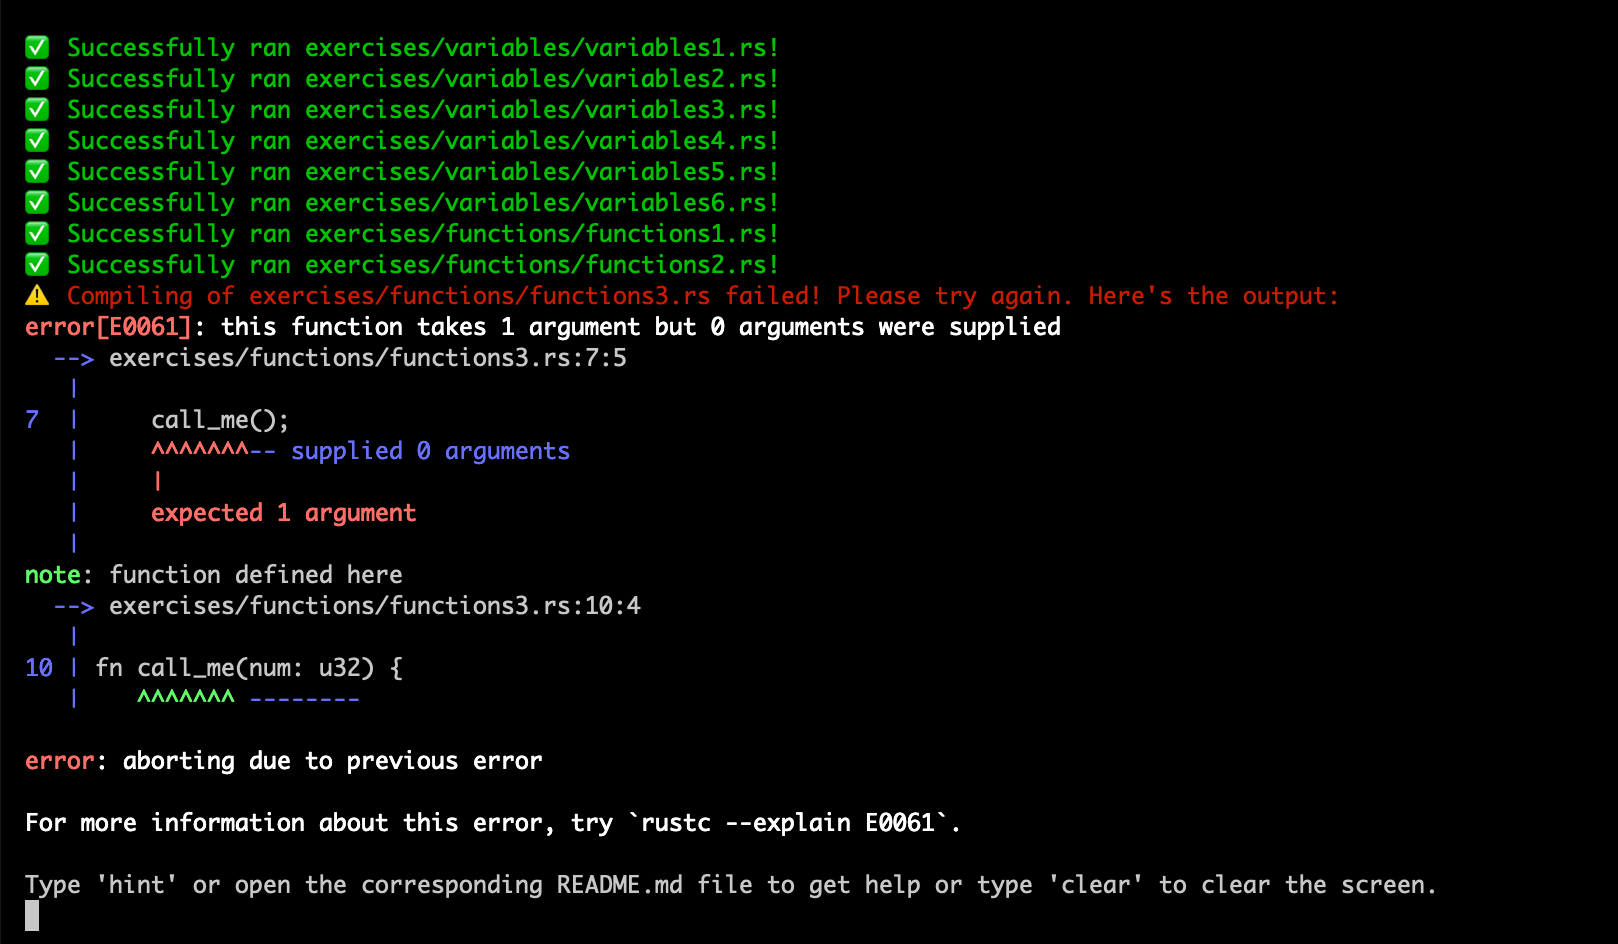 A screenshot of the rustlings app output with few successfull exercise prompts and a compiler error